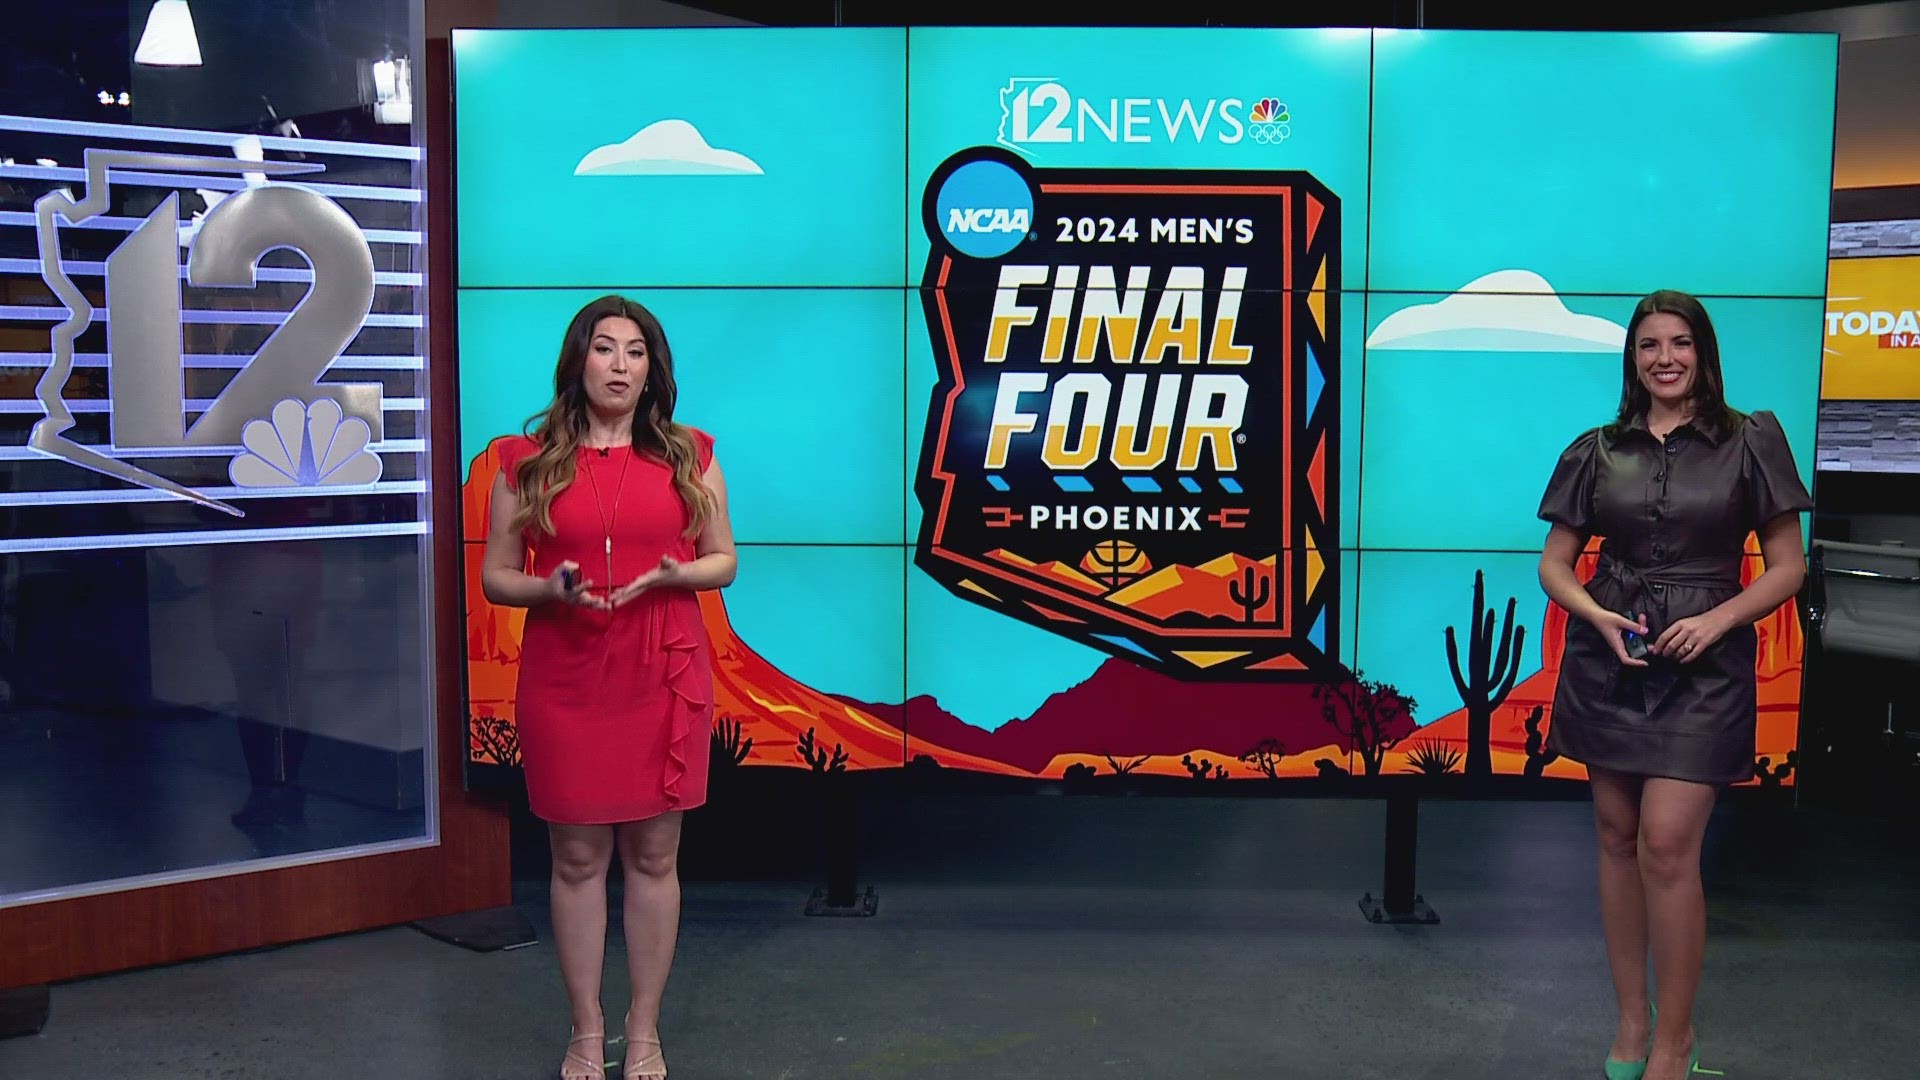 If you are traveling to Phoenix for the Final Four festivities, here are a few recommendations to make sure your trip goes off without a hitch.